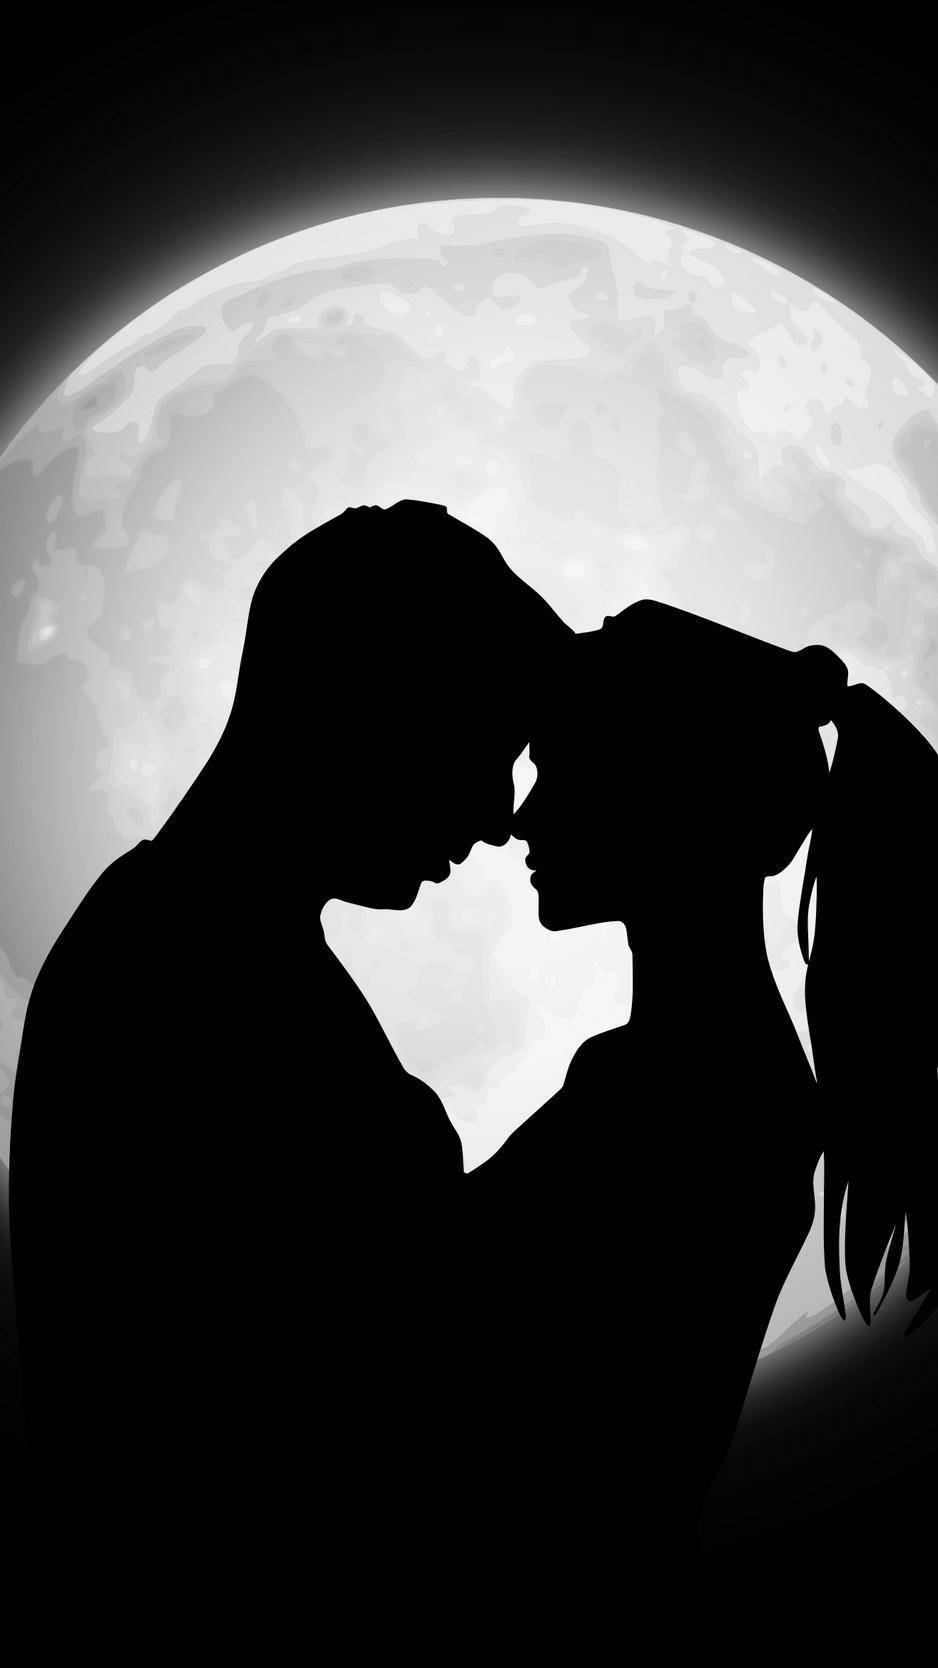 Download Couple Moon Silhouette Love Iphone Wallpaper 